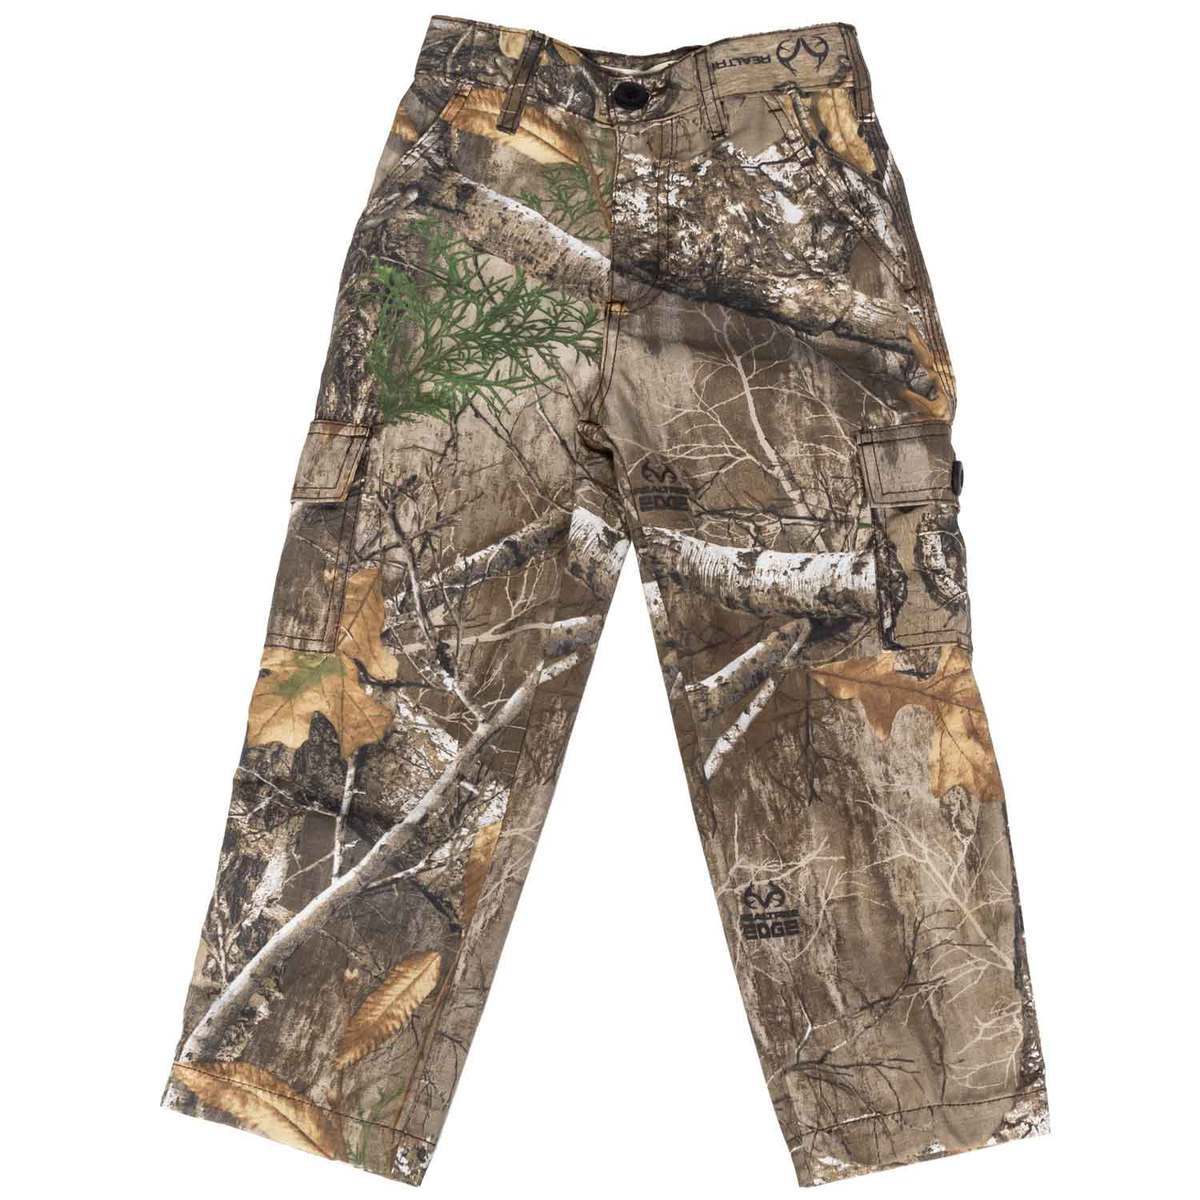 Realtree, Bottoms, Realtree Cargo Camouflage Hunting Pants